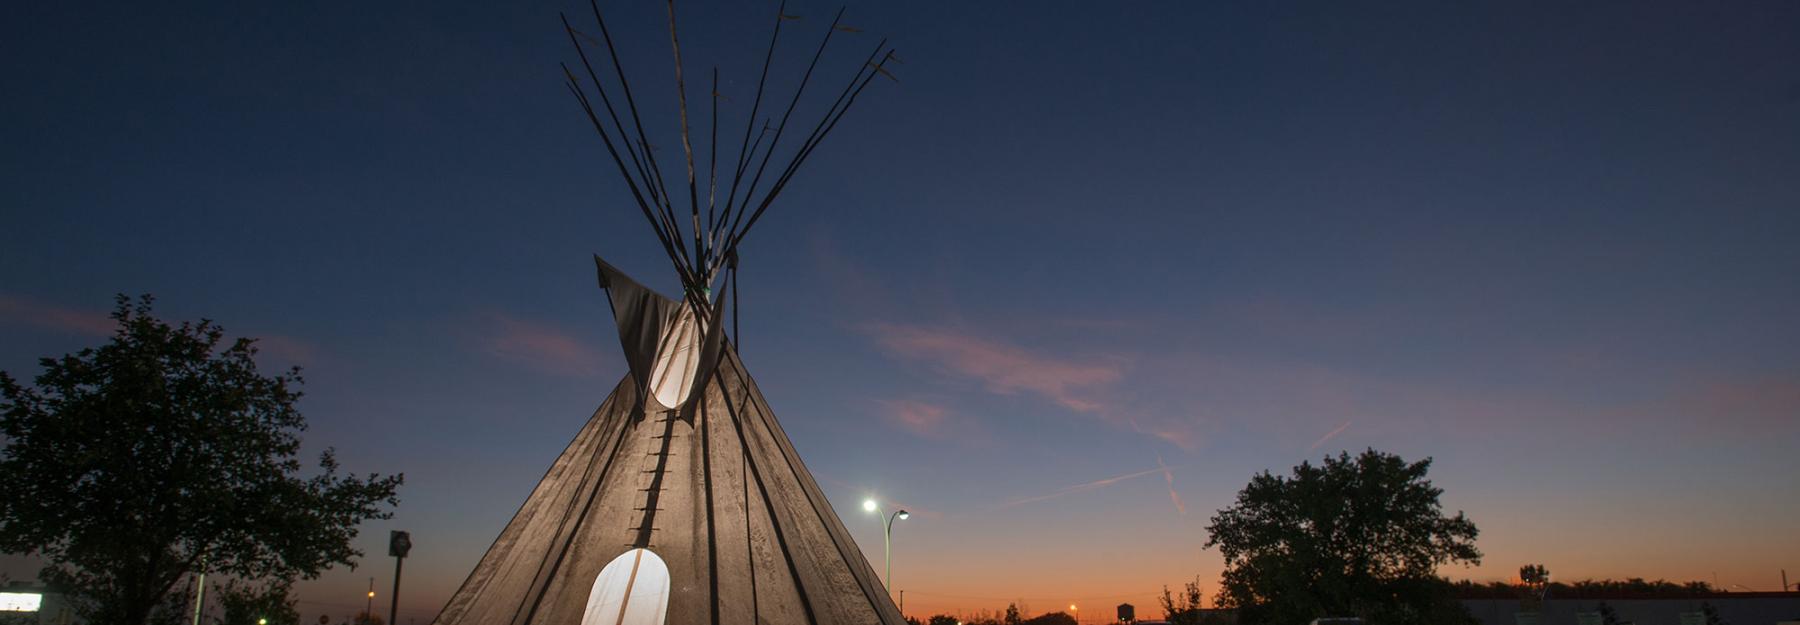 Tipi outside of college's campus